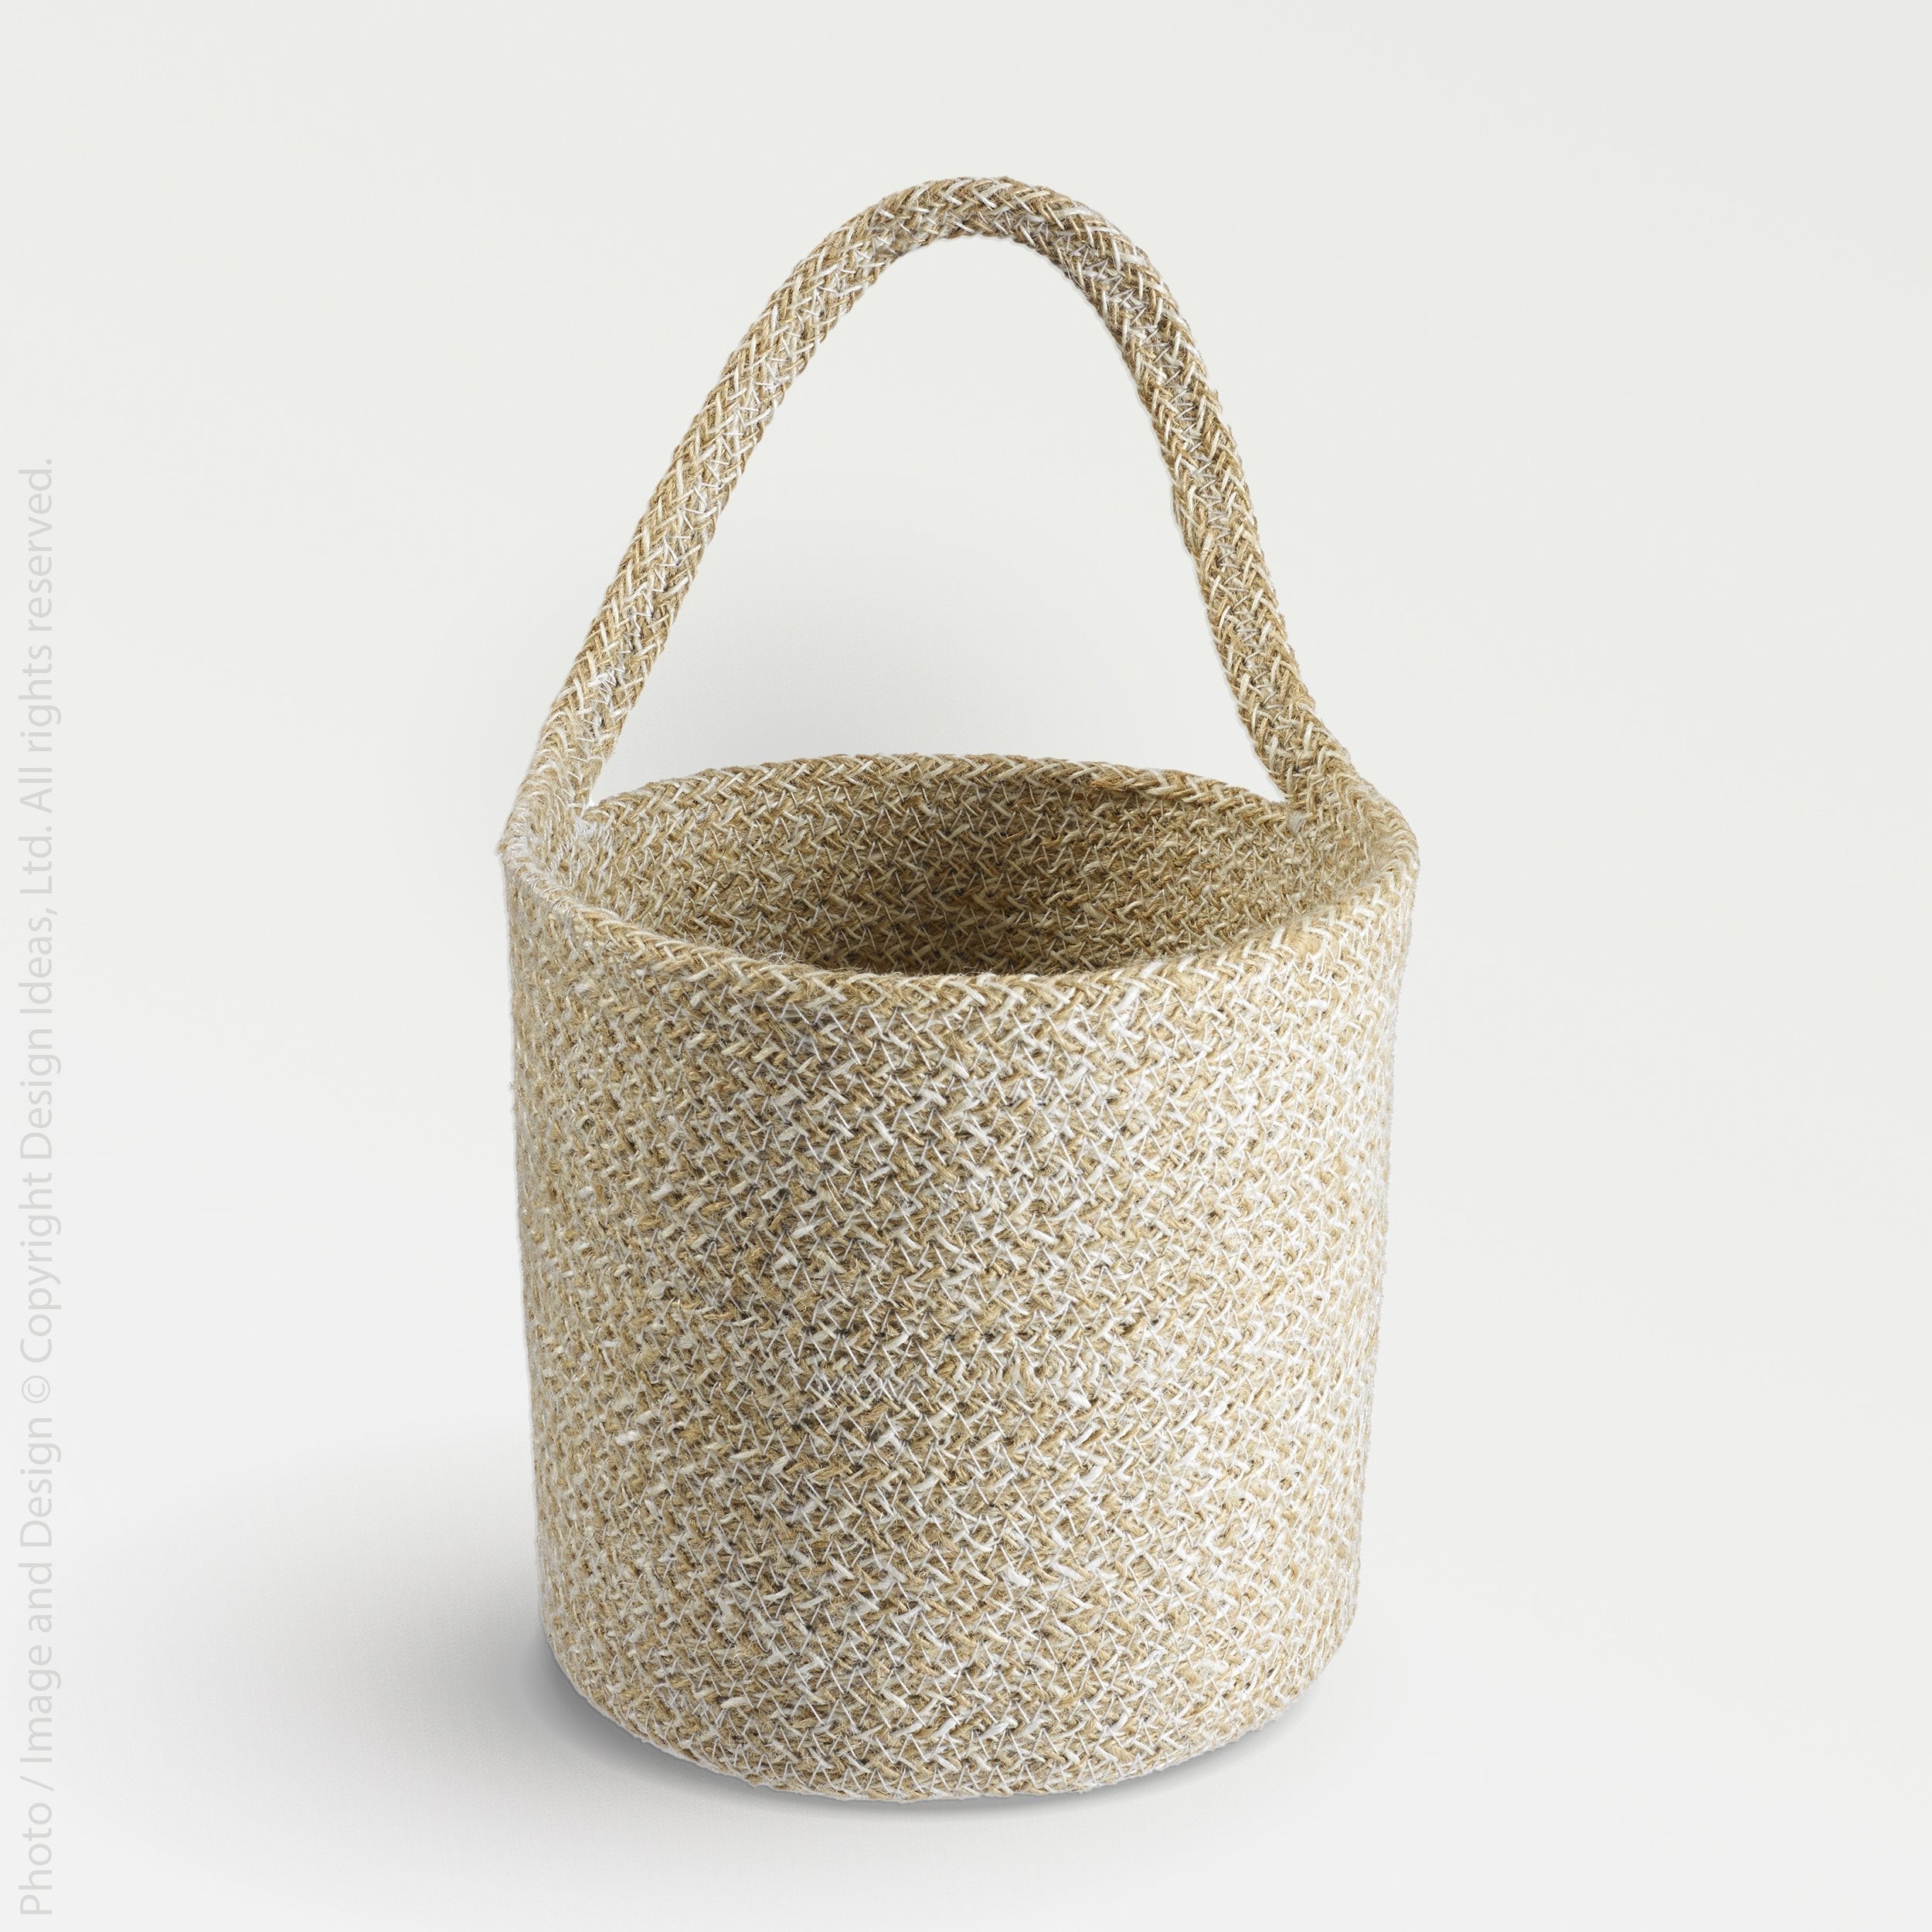 Melia™ hanging basket (6.3 x 7 x 6.5 in.) - Black | Image 1 | Premium Basket from the Melia collection | made with Jute for long lasting use | texxture